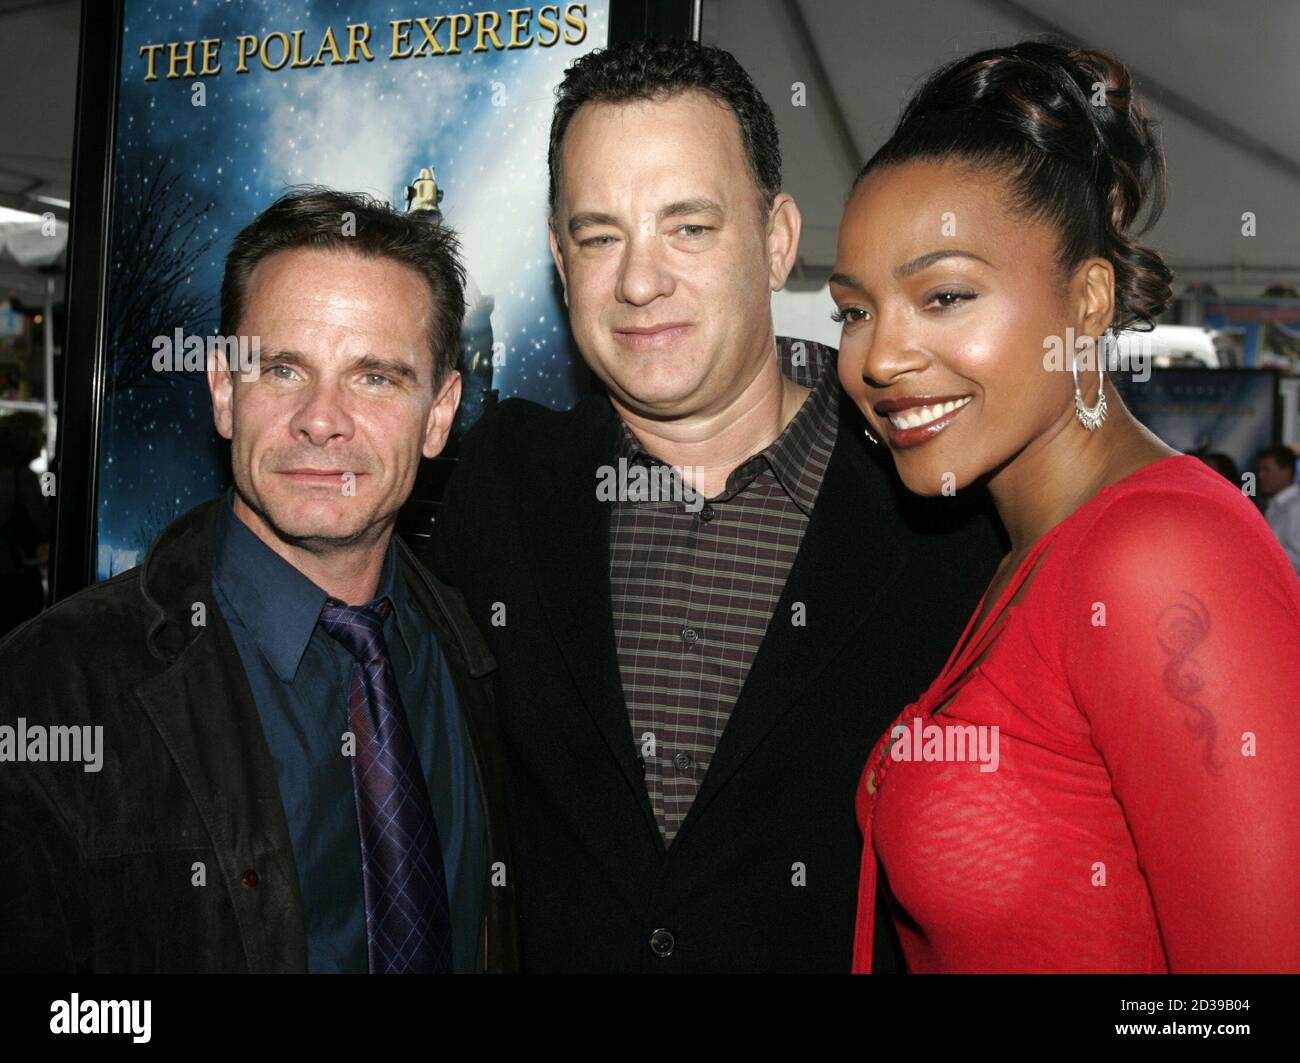 Actors (L-R) Peter Scolari, Tom Hanks and Nona Gaye, stars of the new  computer animated film "The Polar Express" pose a film's premiere in  Hollywood, November 7, 2004. [The film based on